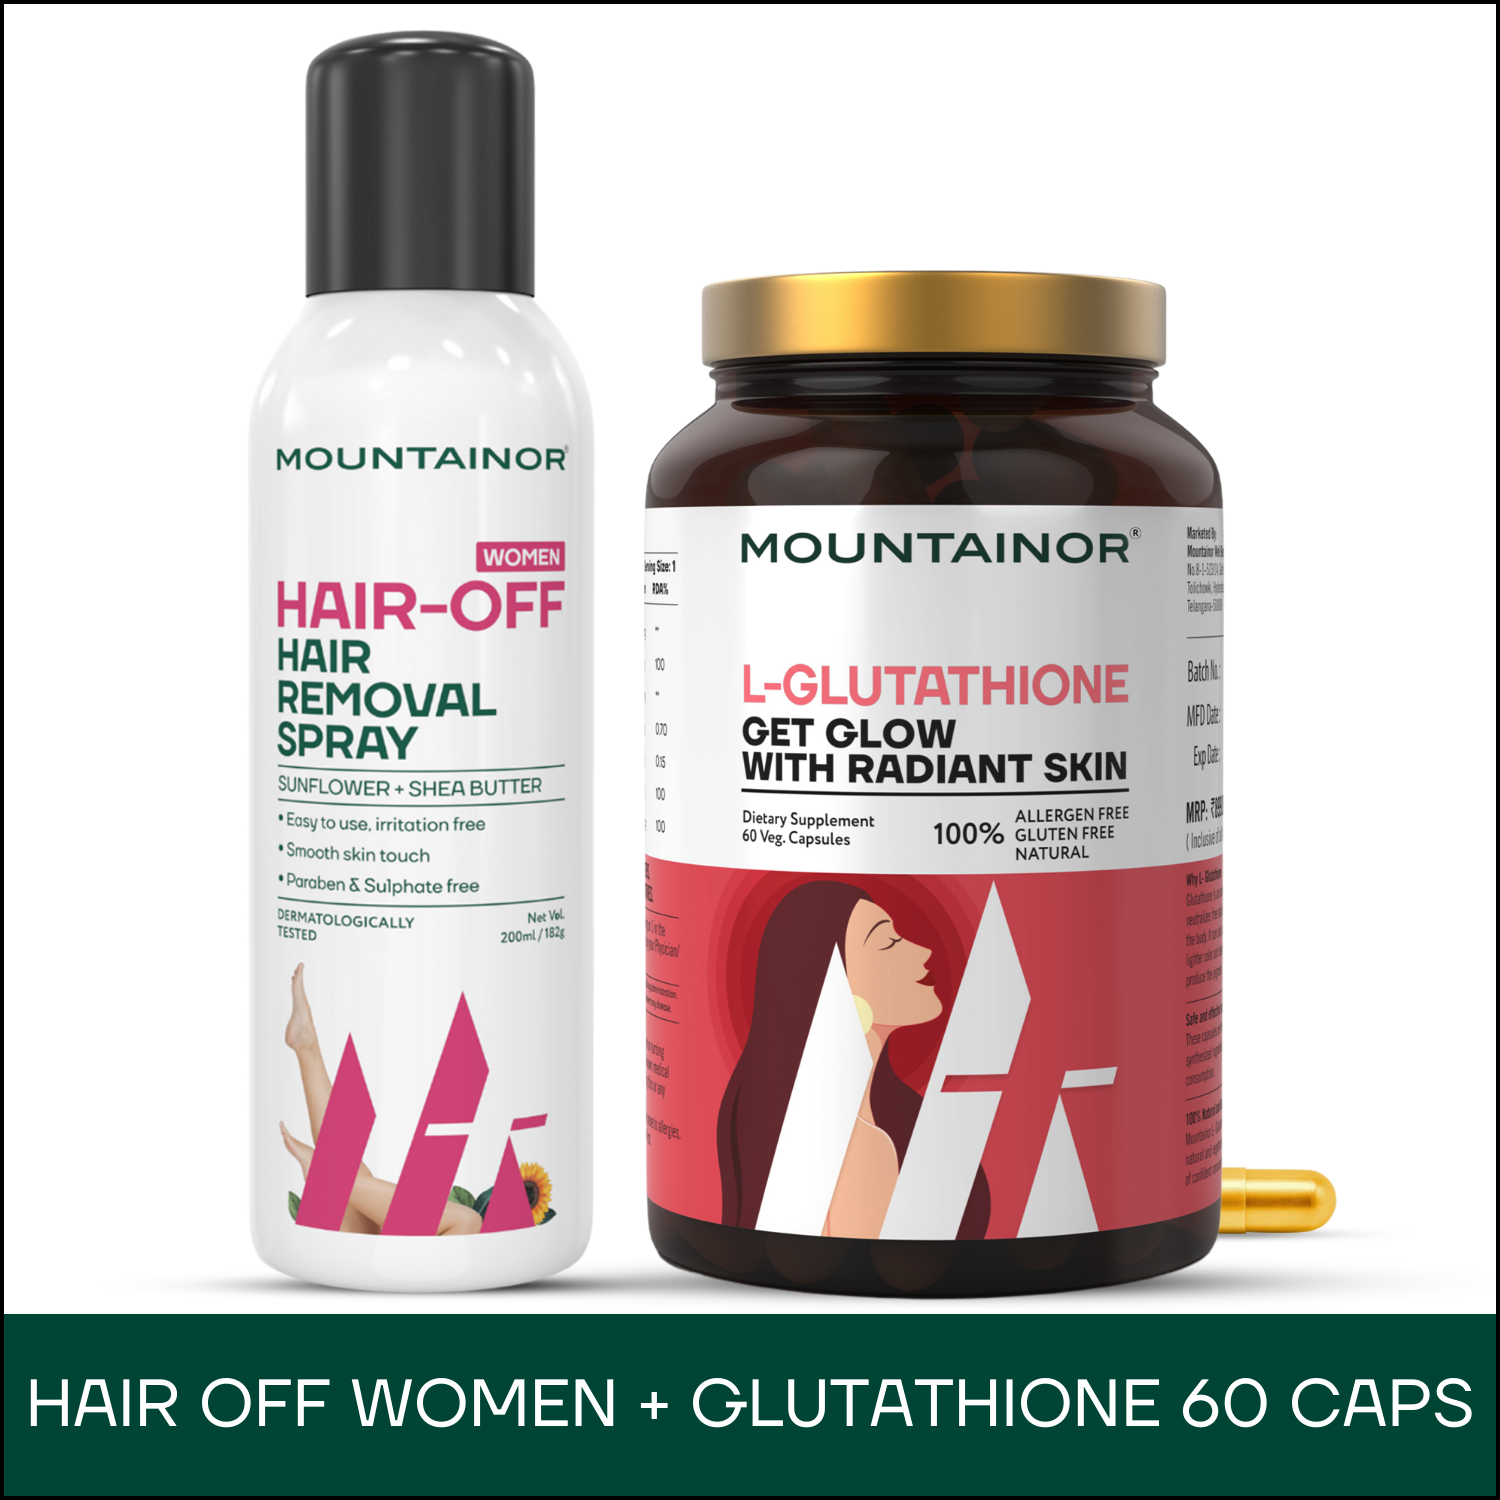 Hair Removal Spray For Women + Glutathione 60 Caps - Combo Pack